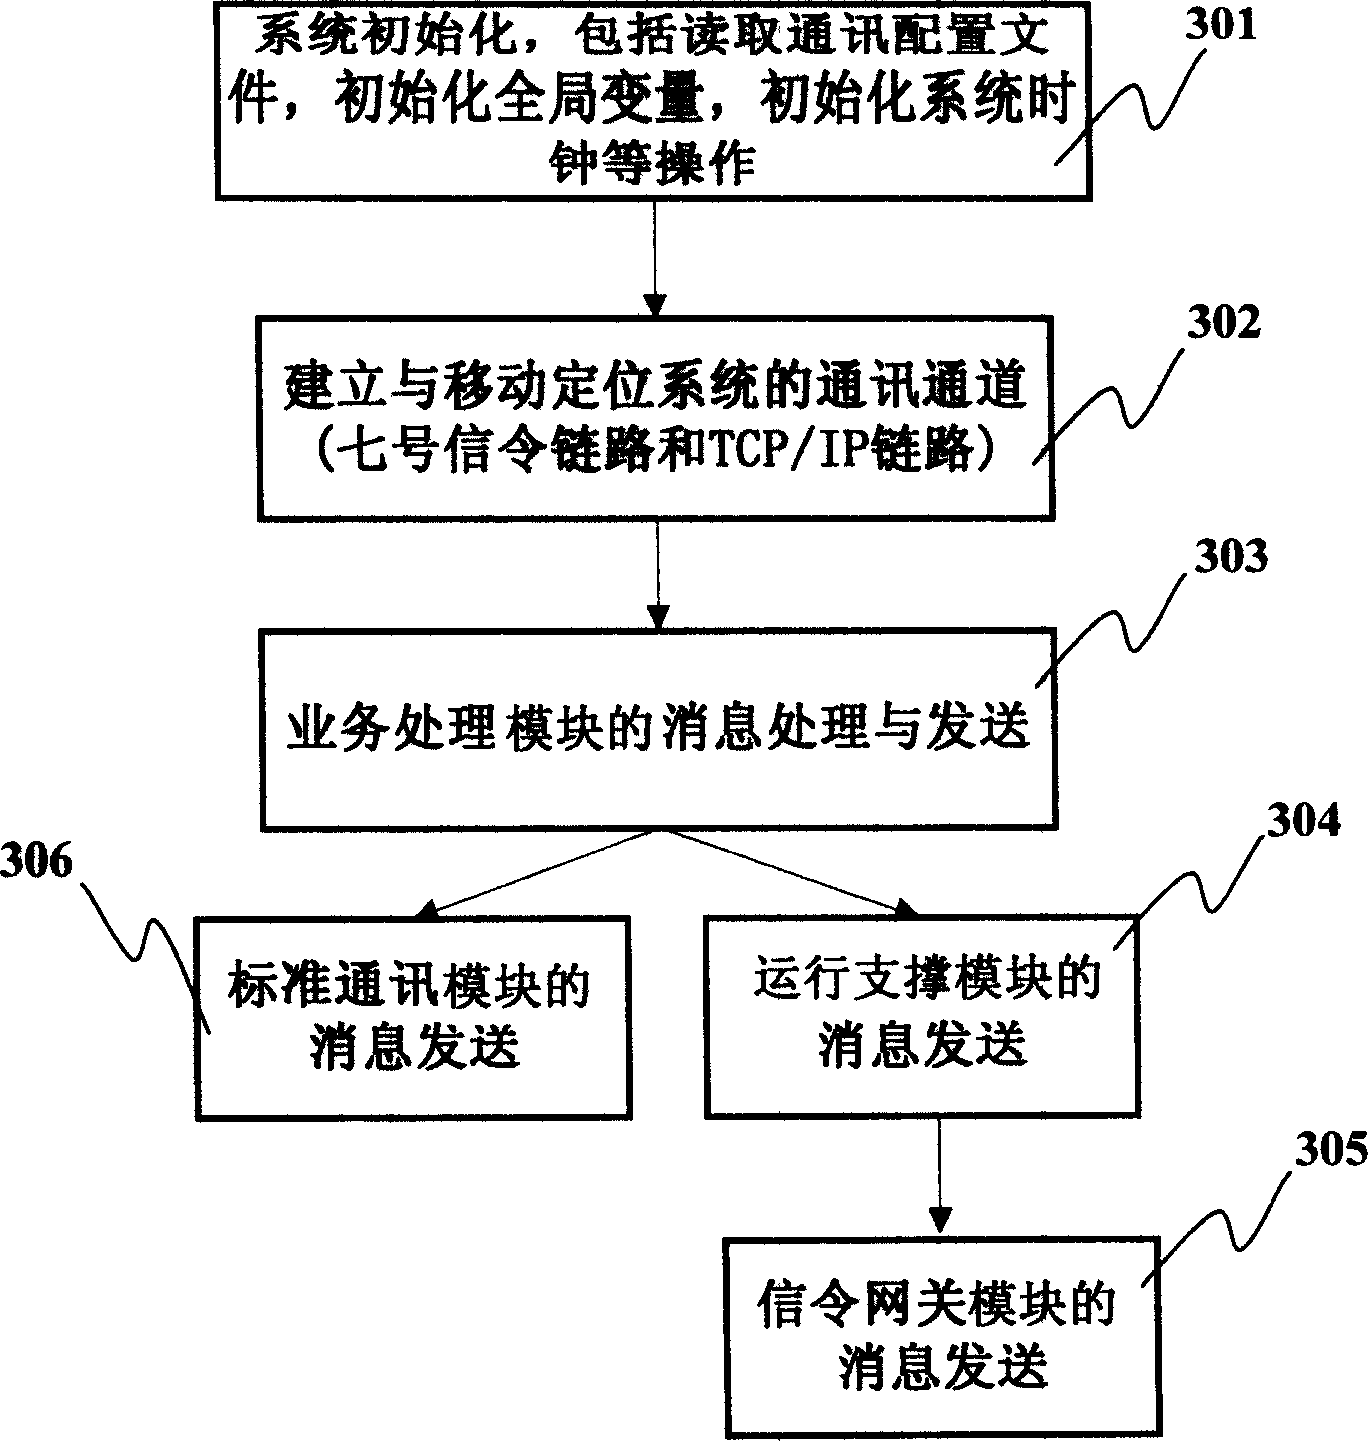 Analogue request position information system and method